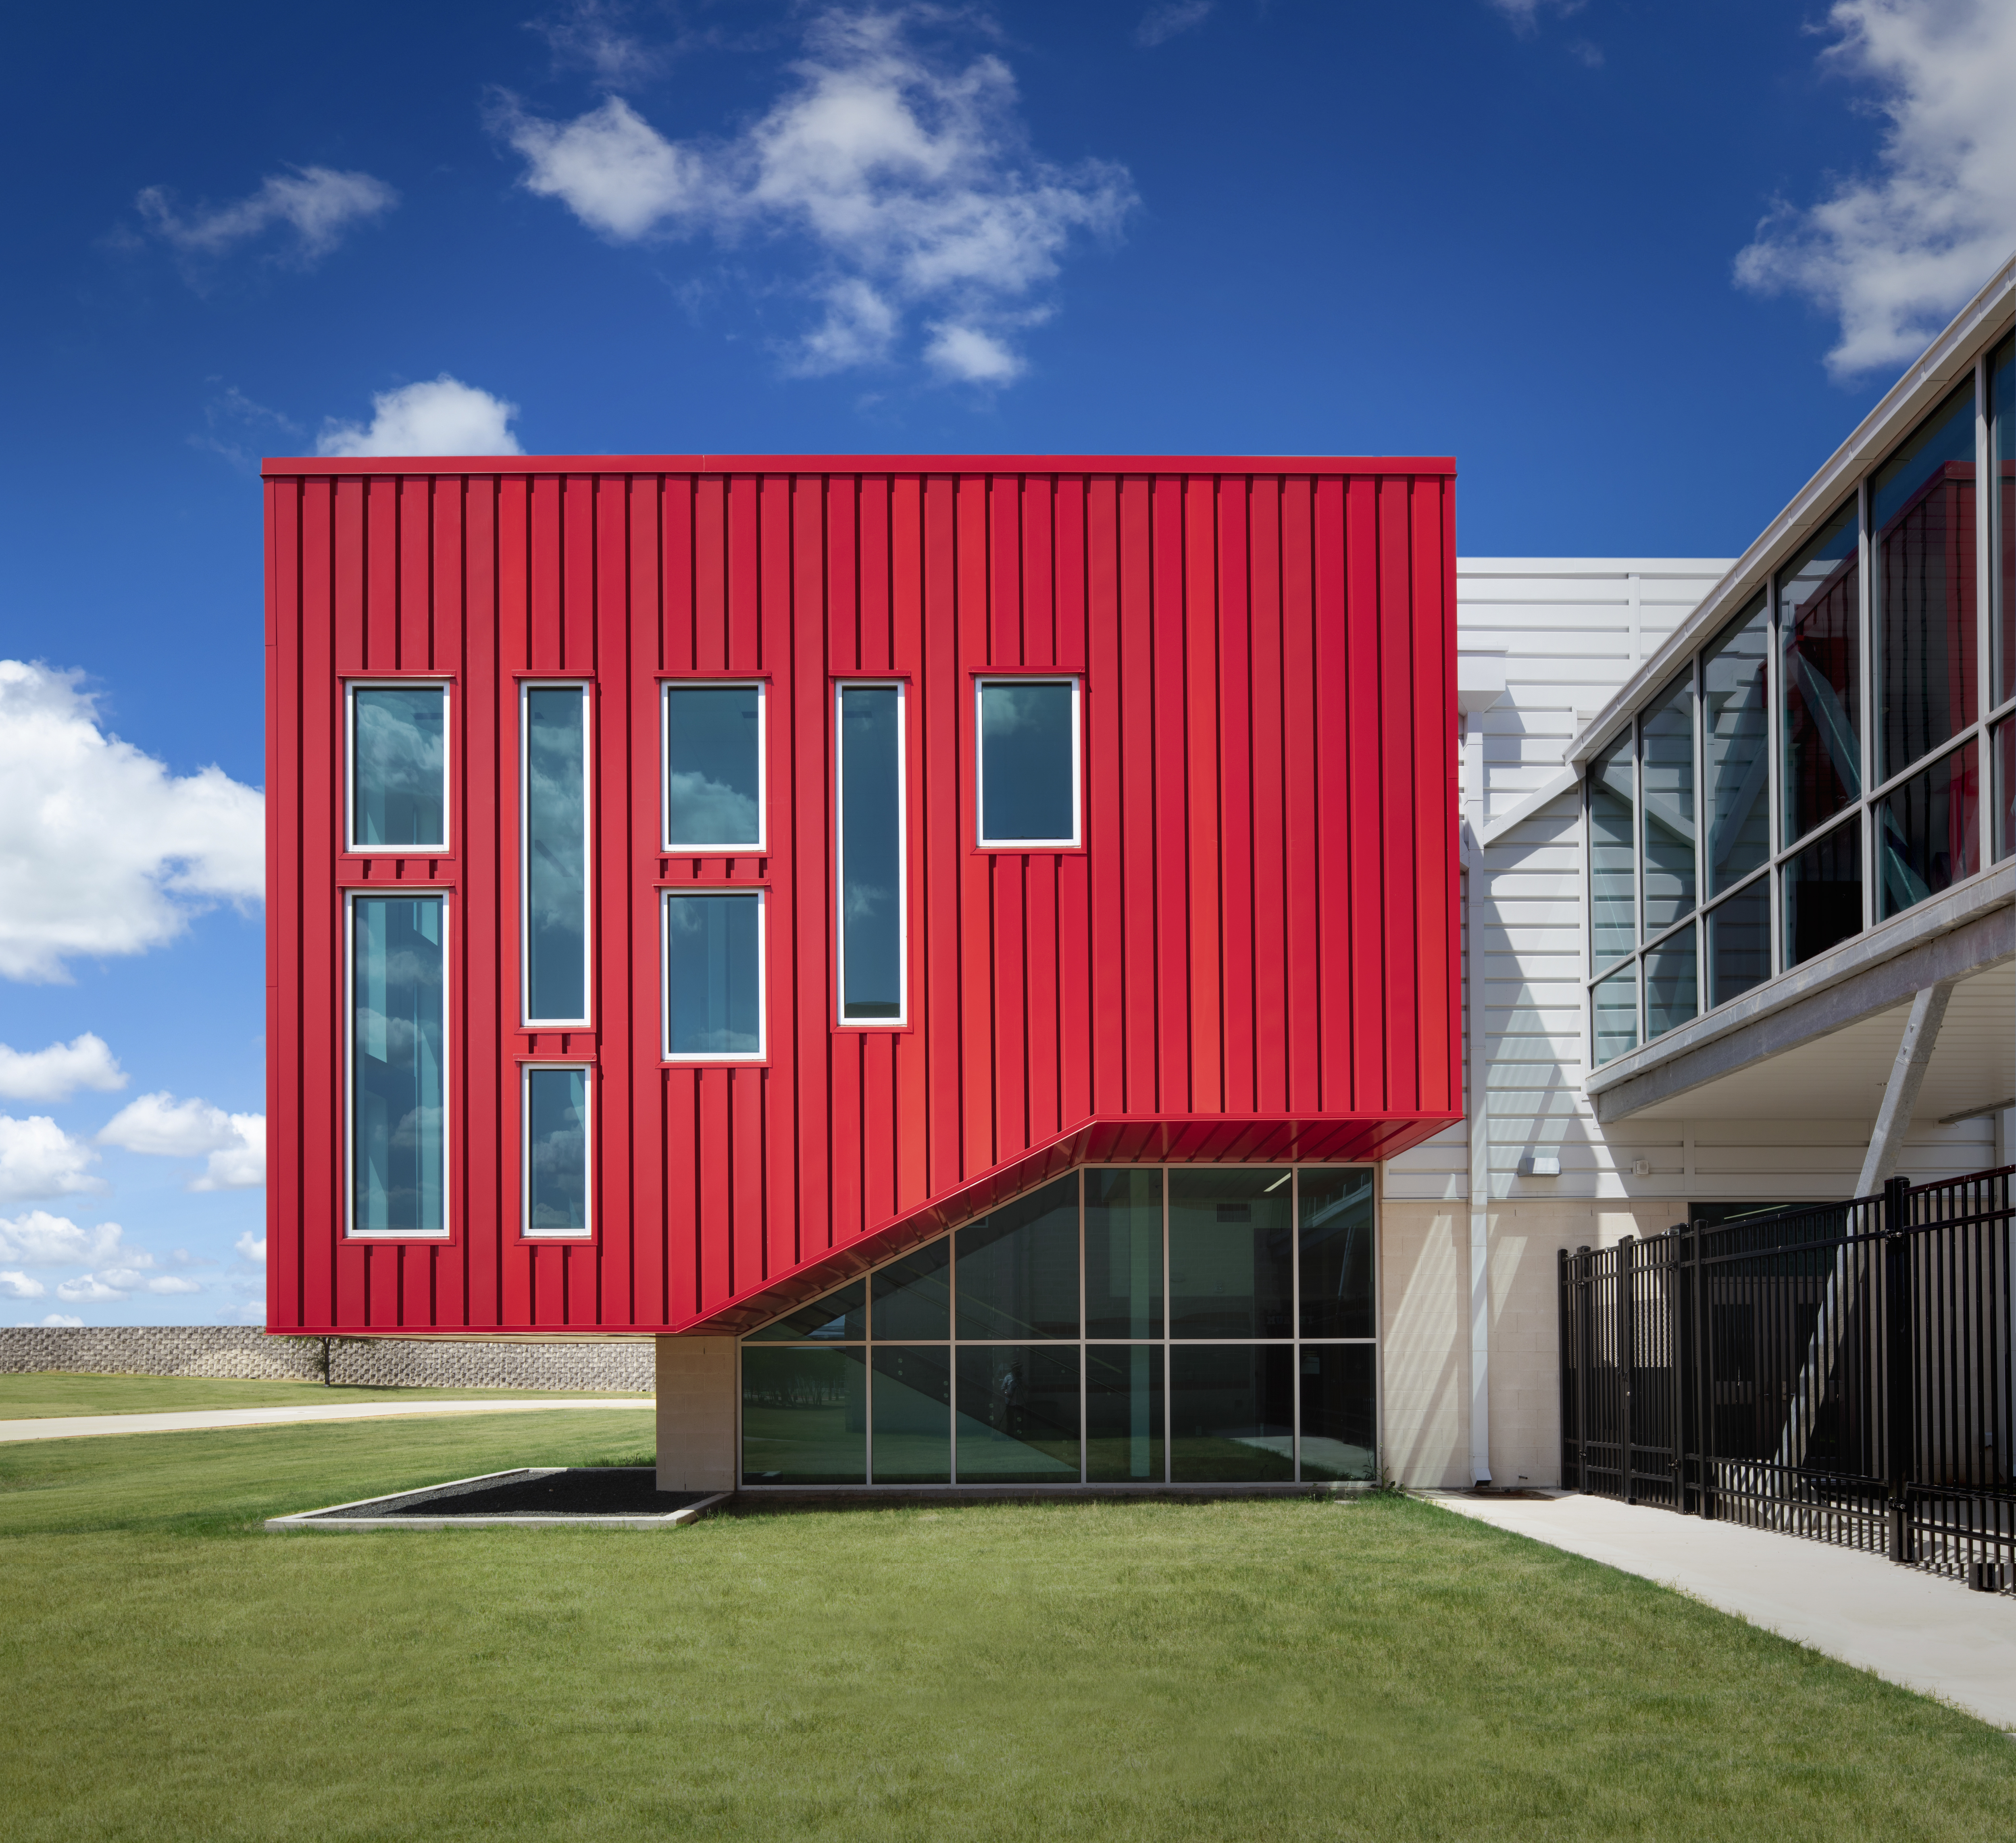 PAC-CLAD Highline S1 metal wall panel system clads Del Valle Career & Tech Center in 3 shades of red